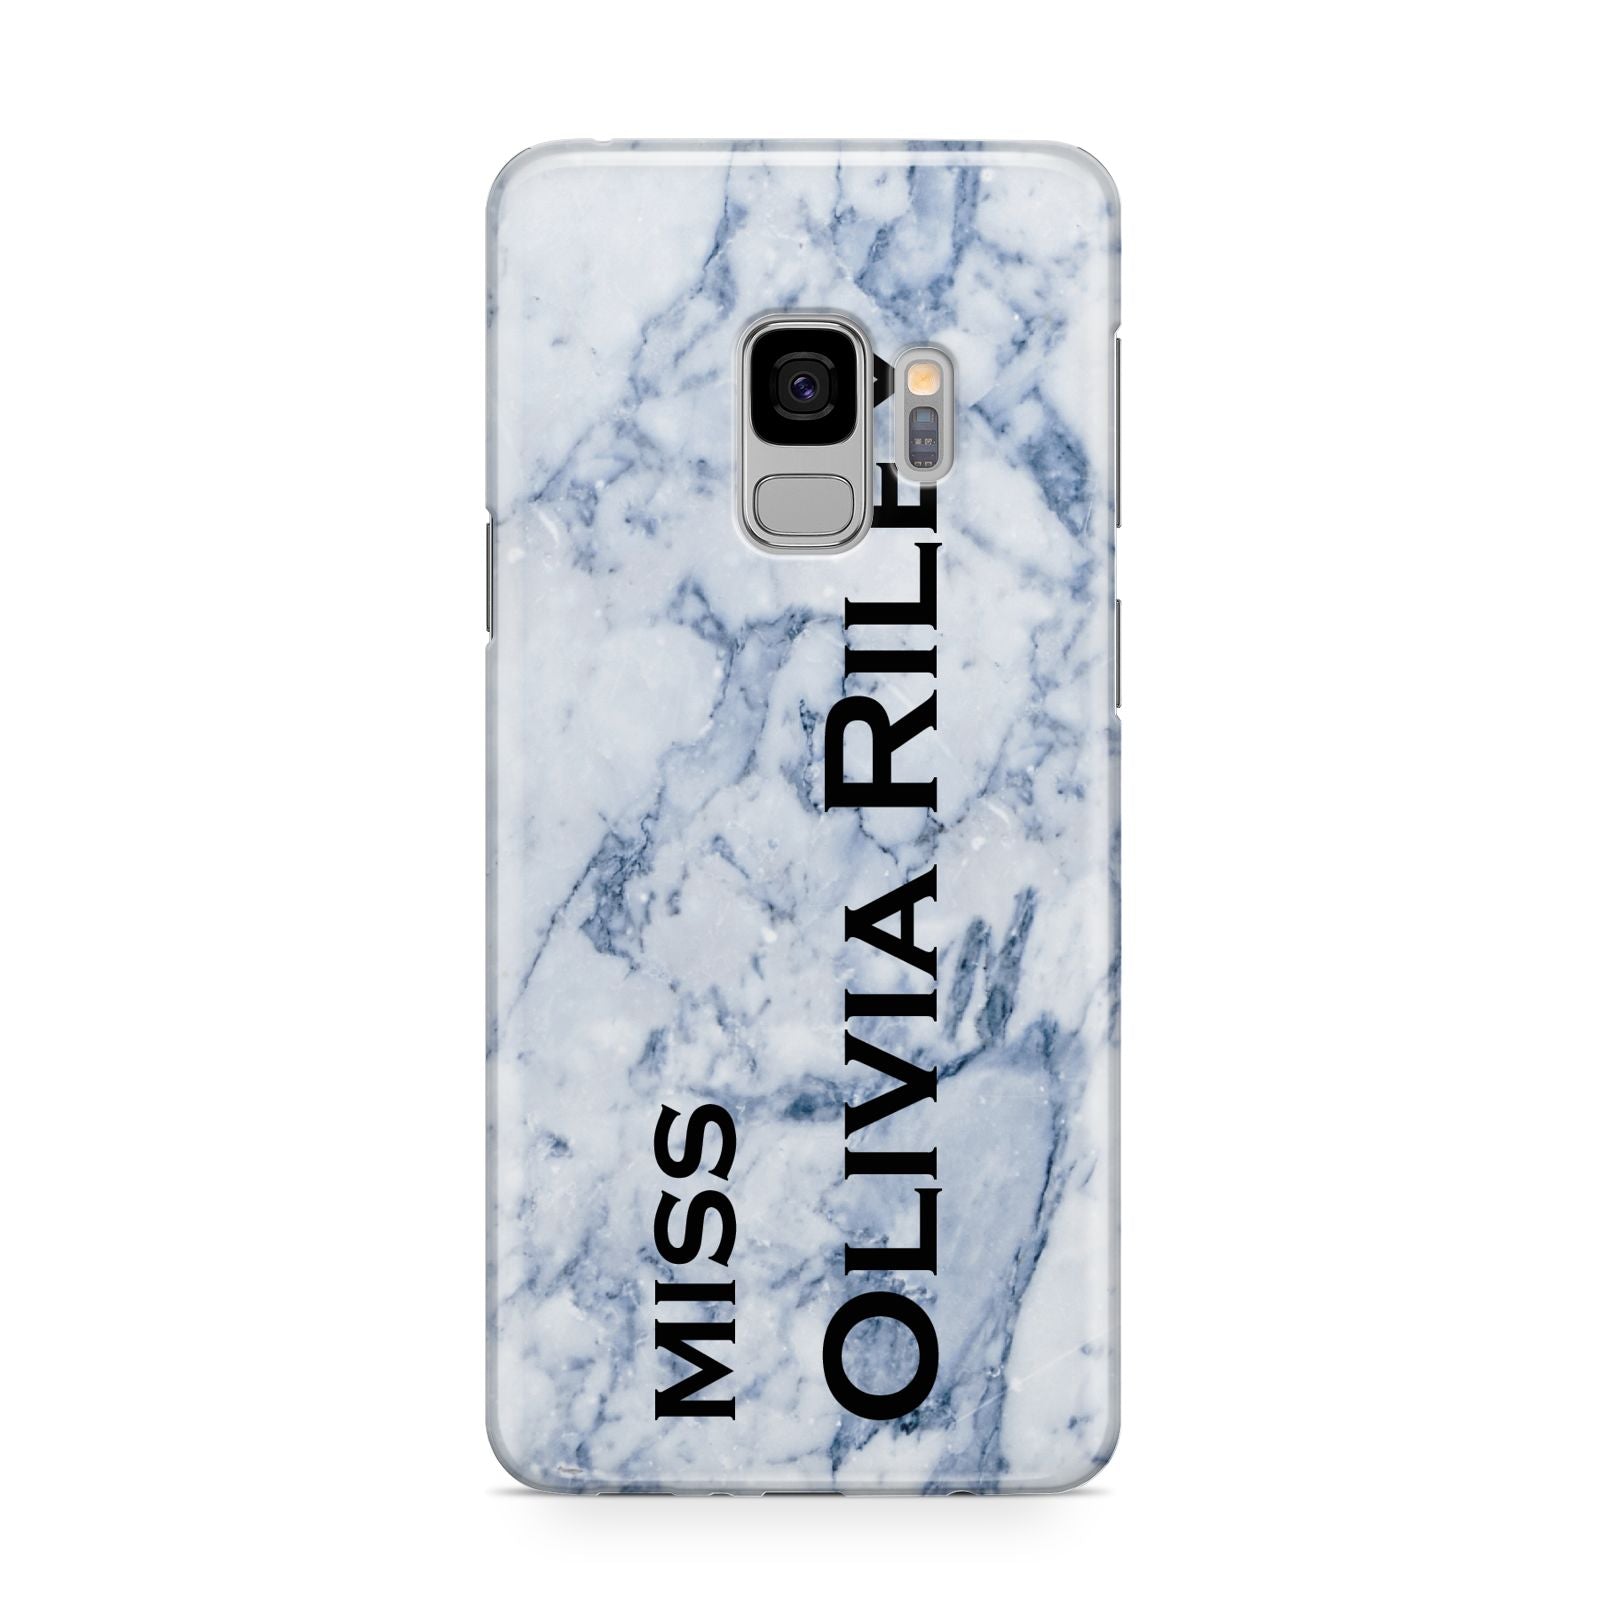 Full Name Grey Marble Samsung Galaxy S9 Case